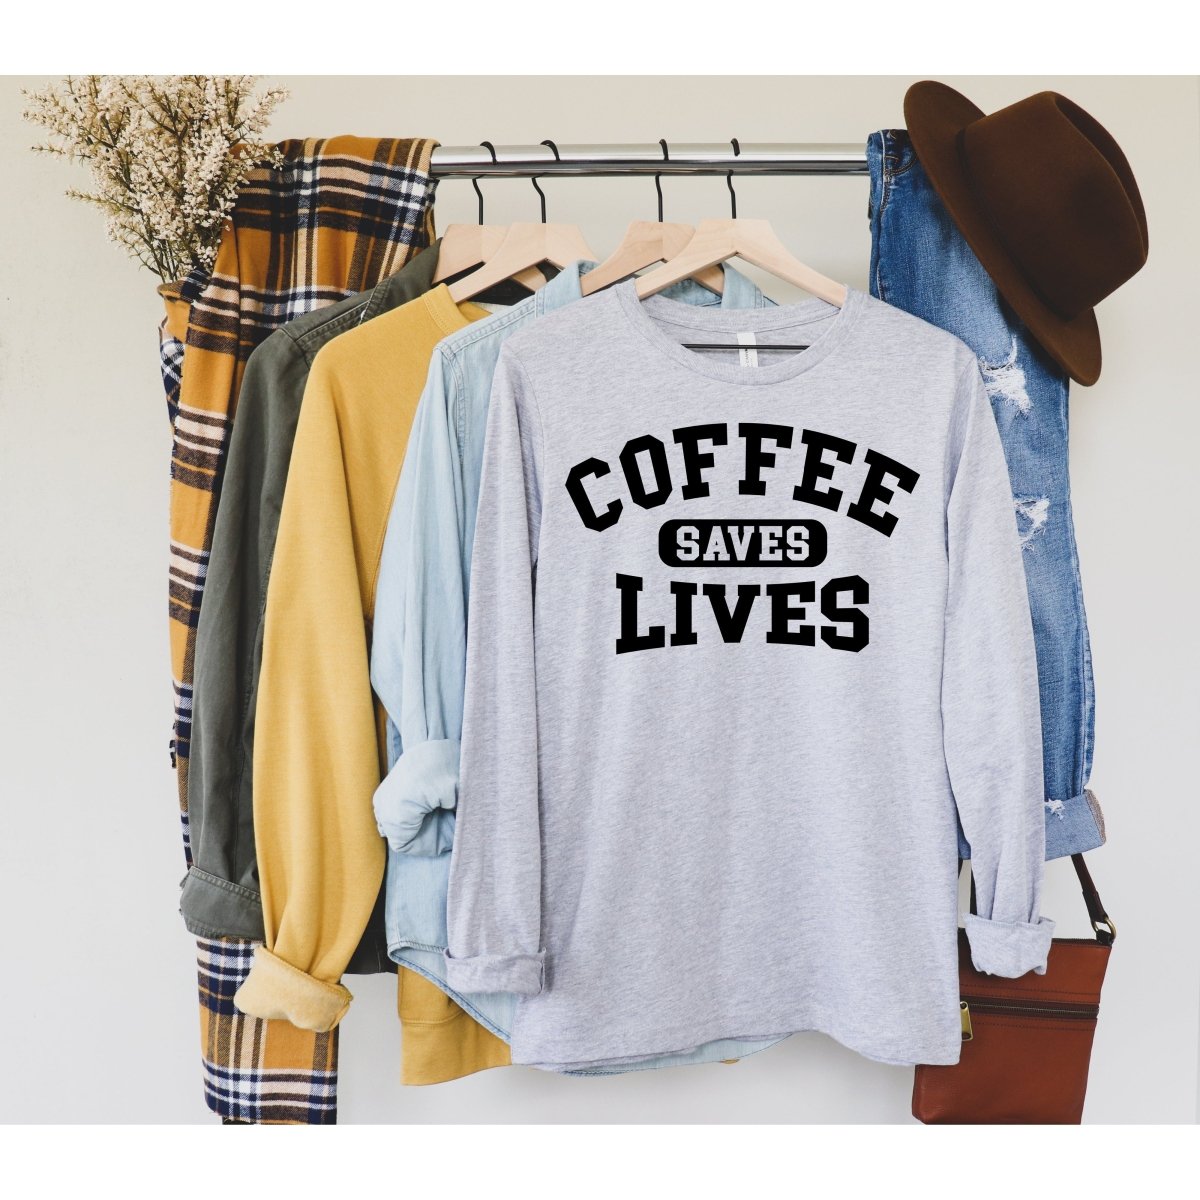 Coffee saves lives long sleeve tee - worldclasscostumes